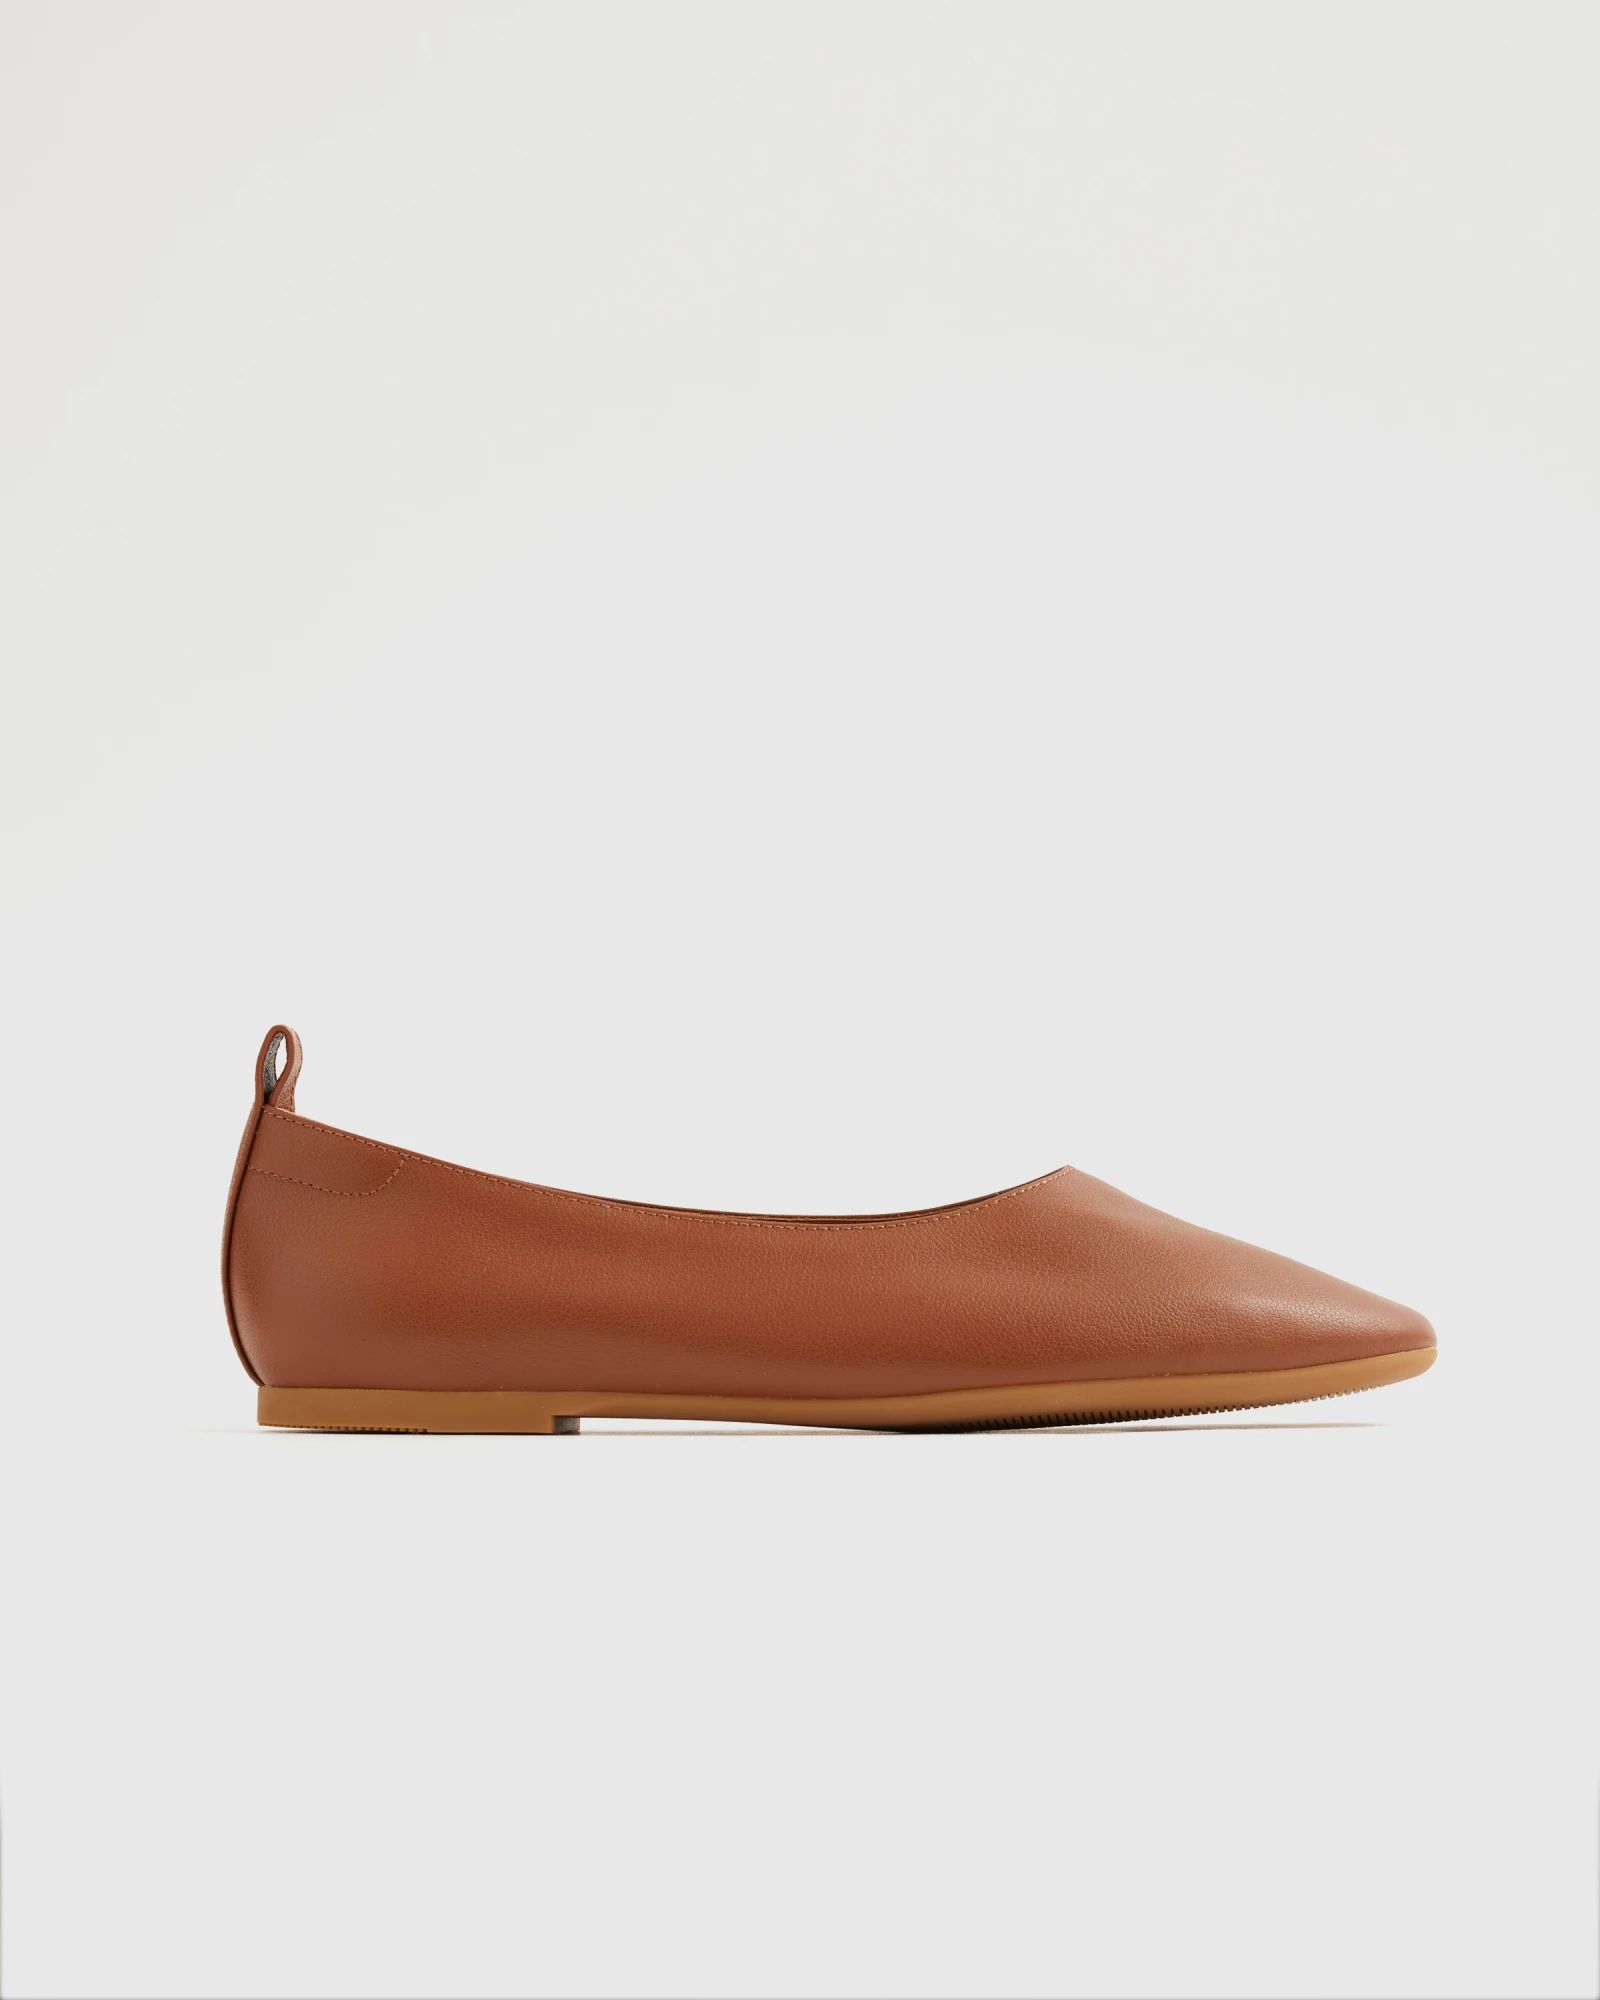 Italian Leather Glove Ballet Flats | Quince